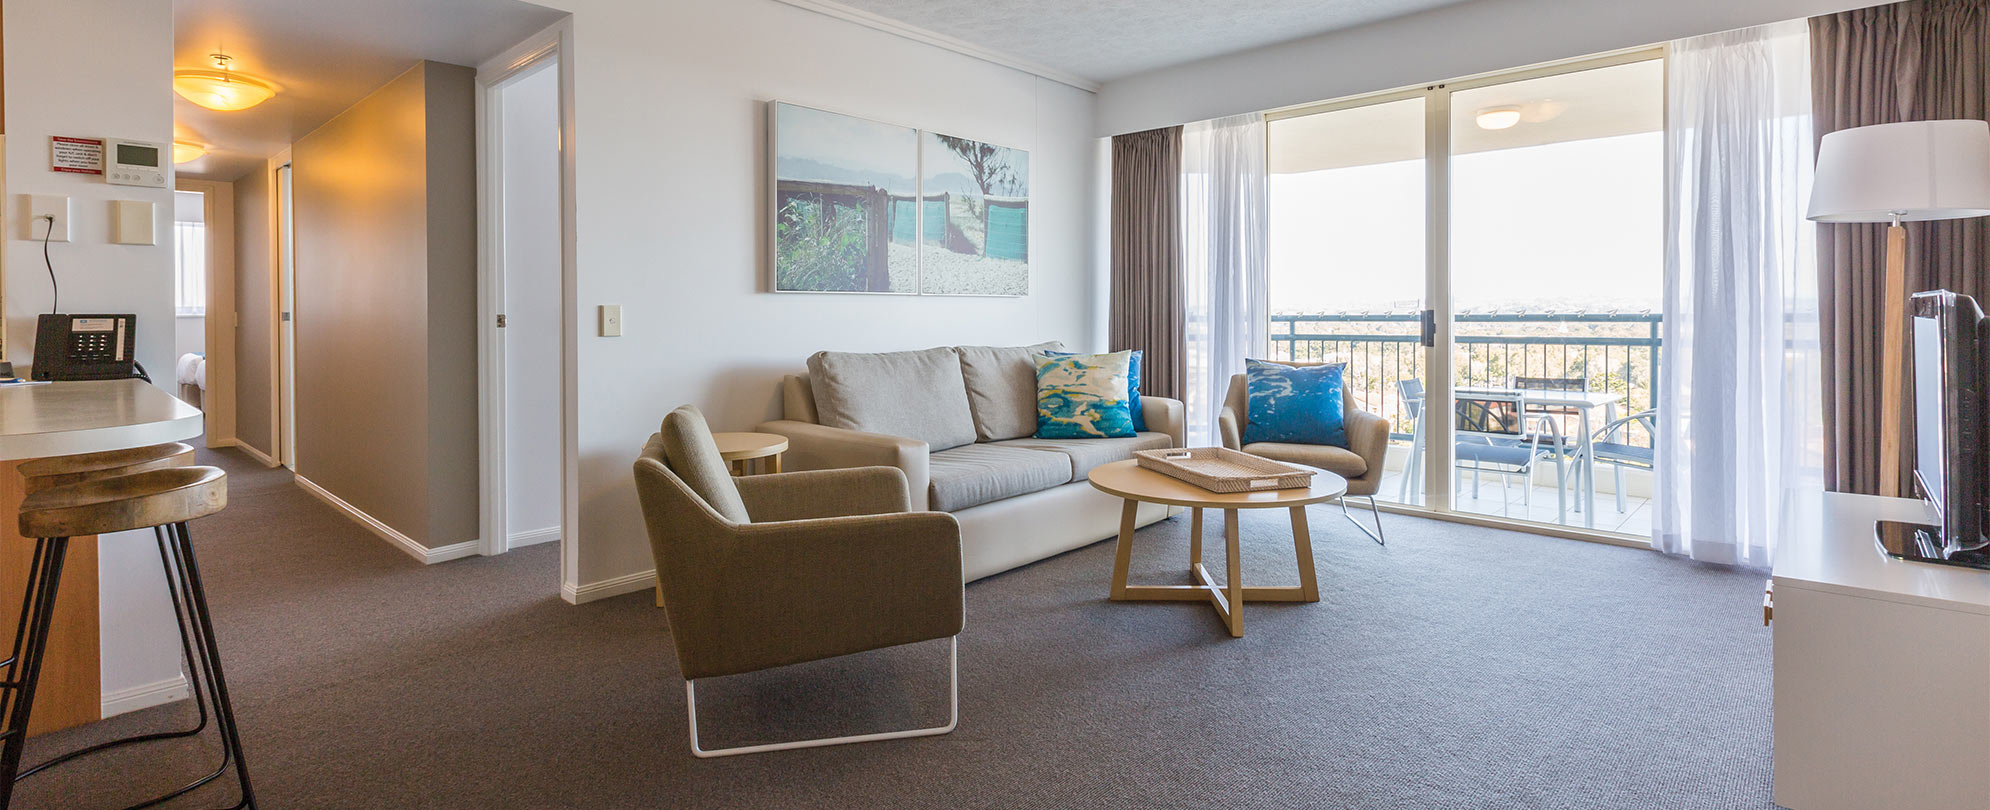 The living area of a Club Wyndham Kirra Beach standard suite with a hallway leading to bedrooms and bathrooms.